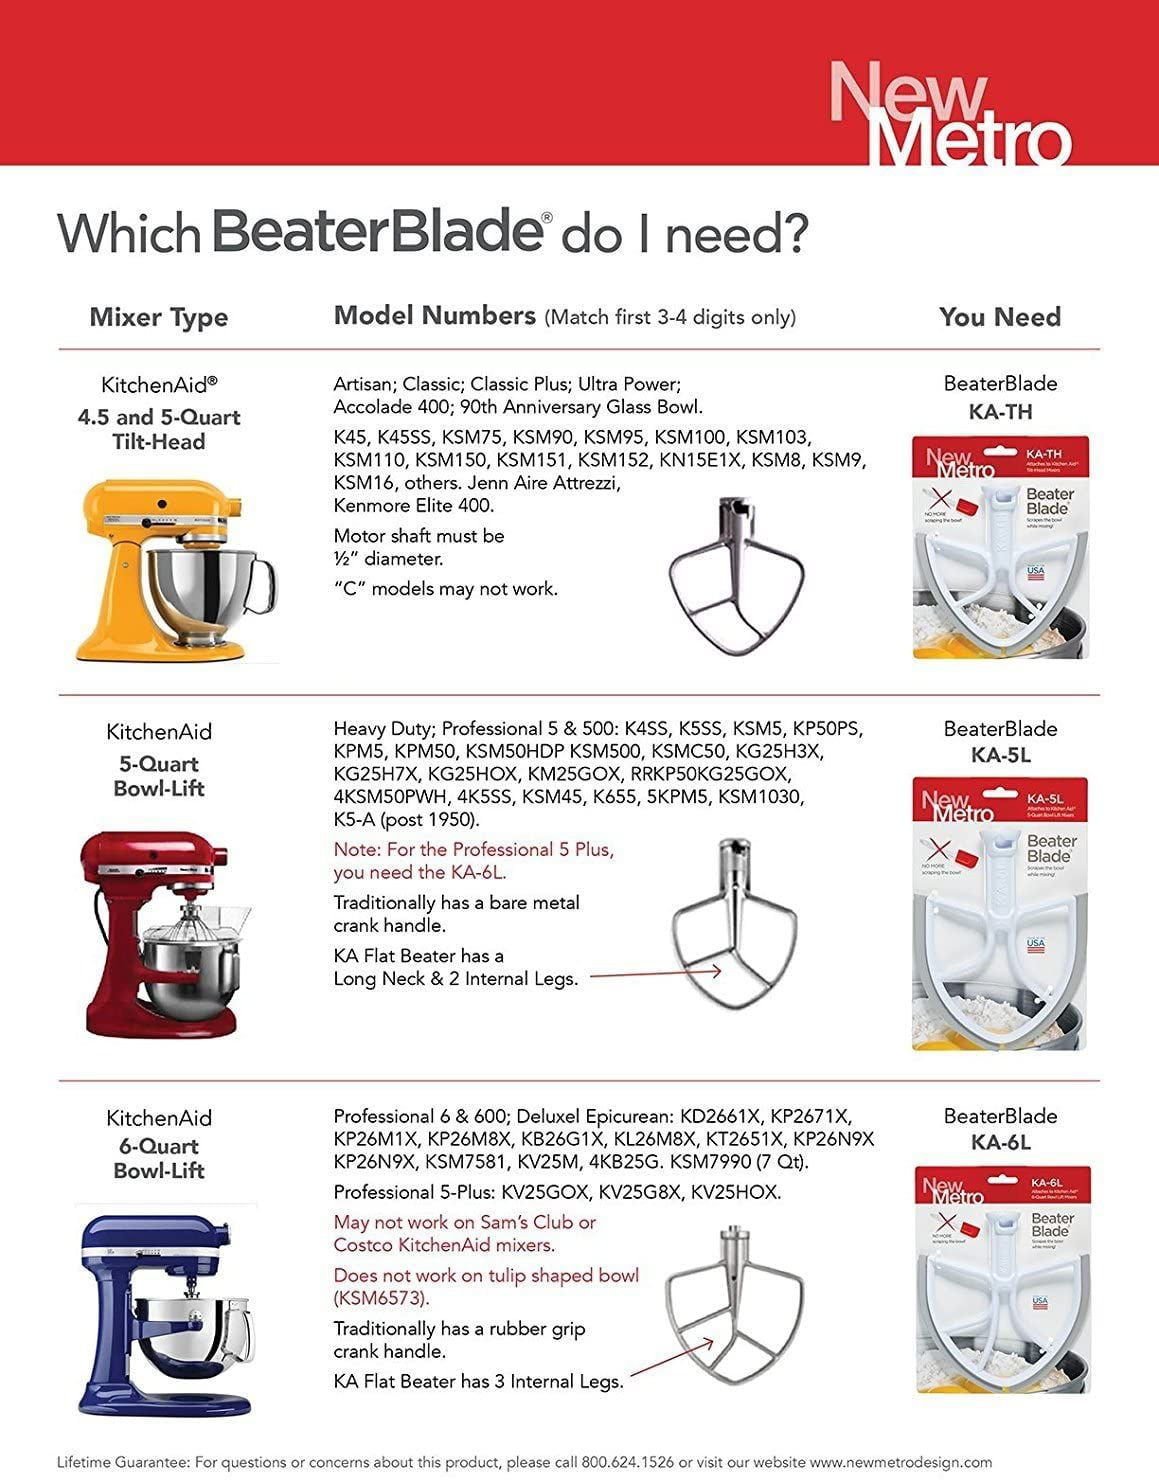  New Metro Design KA-6L Plastic Beater Blade works w/ most  KitchenAid 6 Qt Bowl-Lift Stand Mixers, Grey : Everything Else